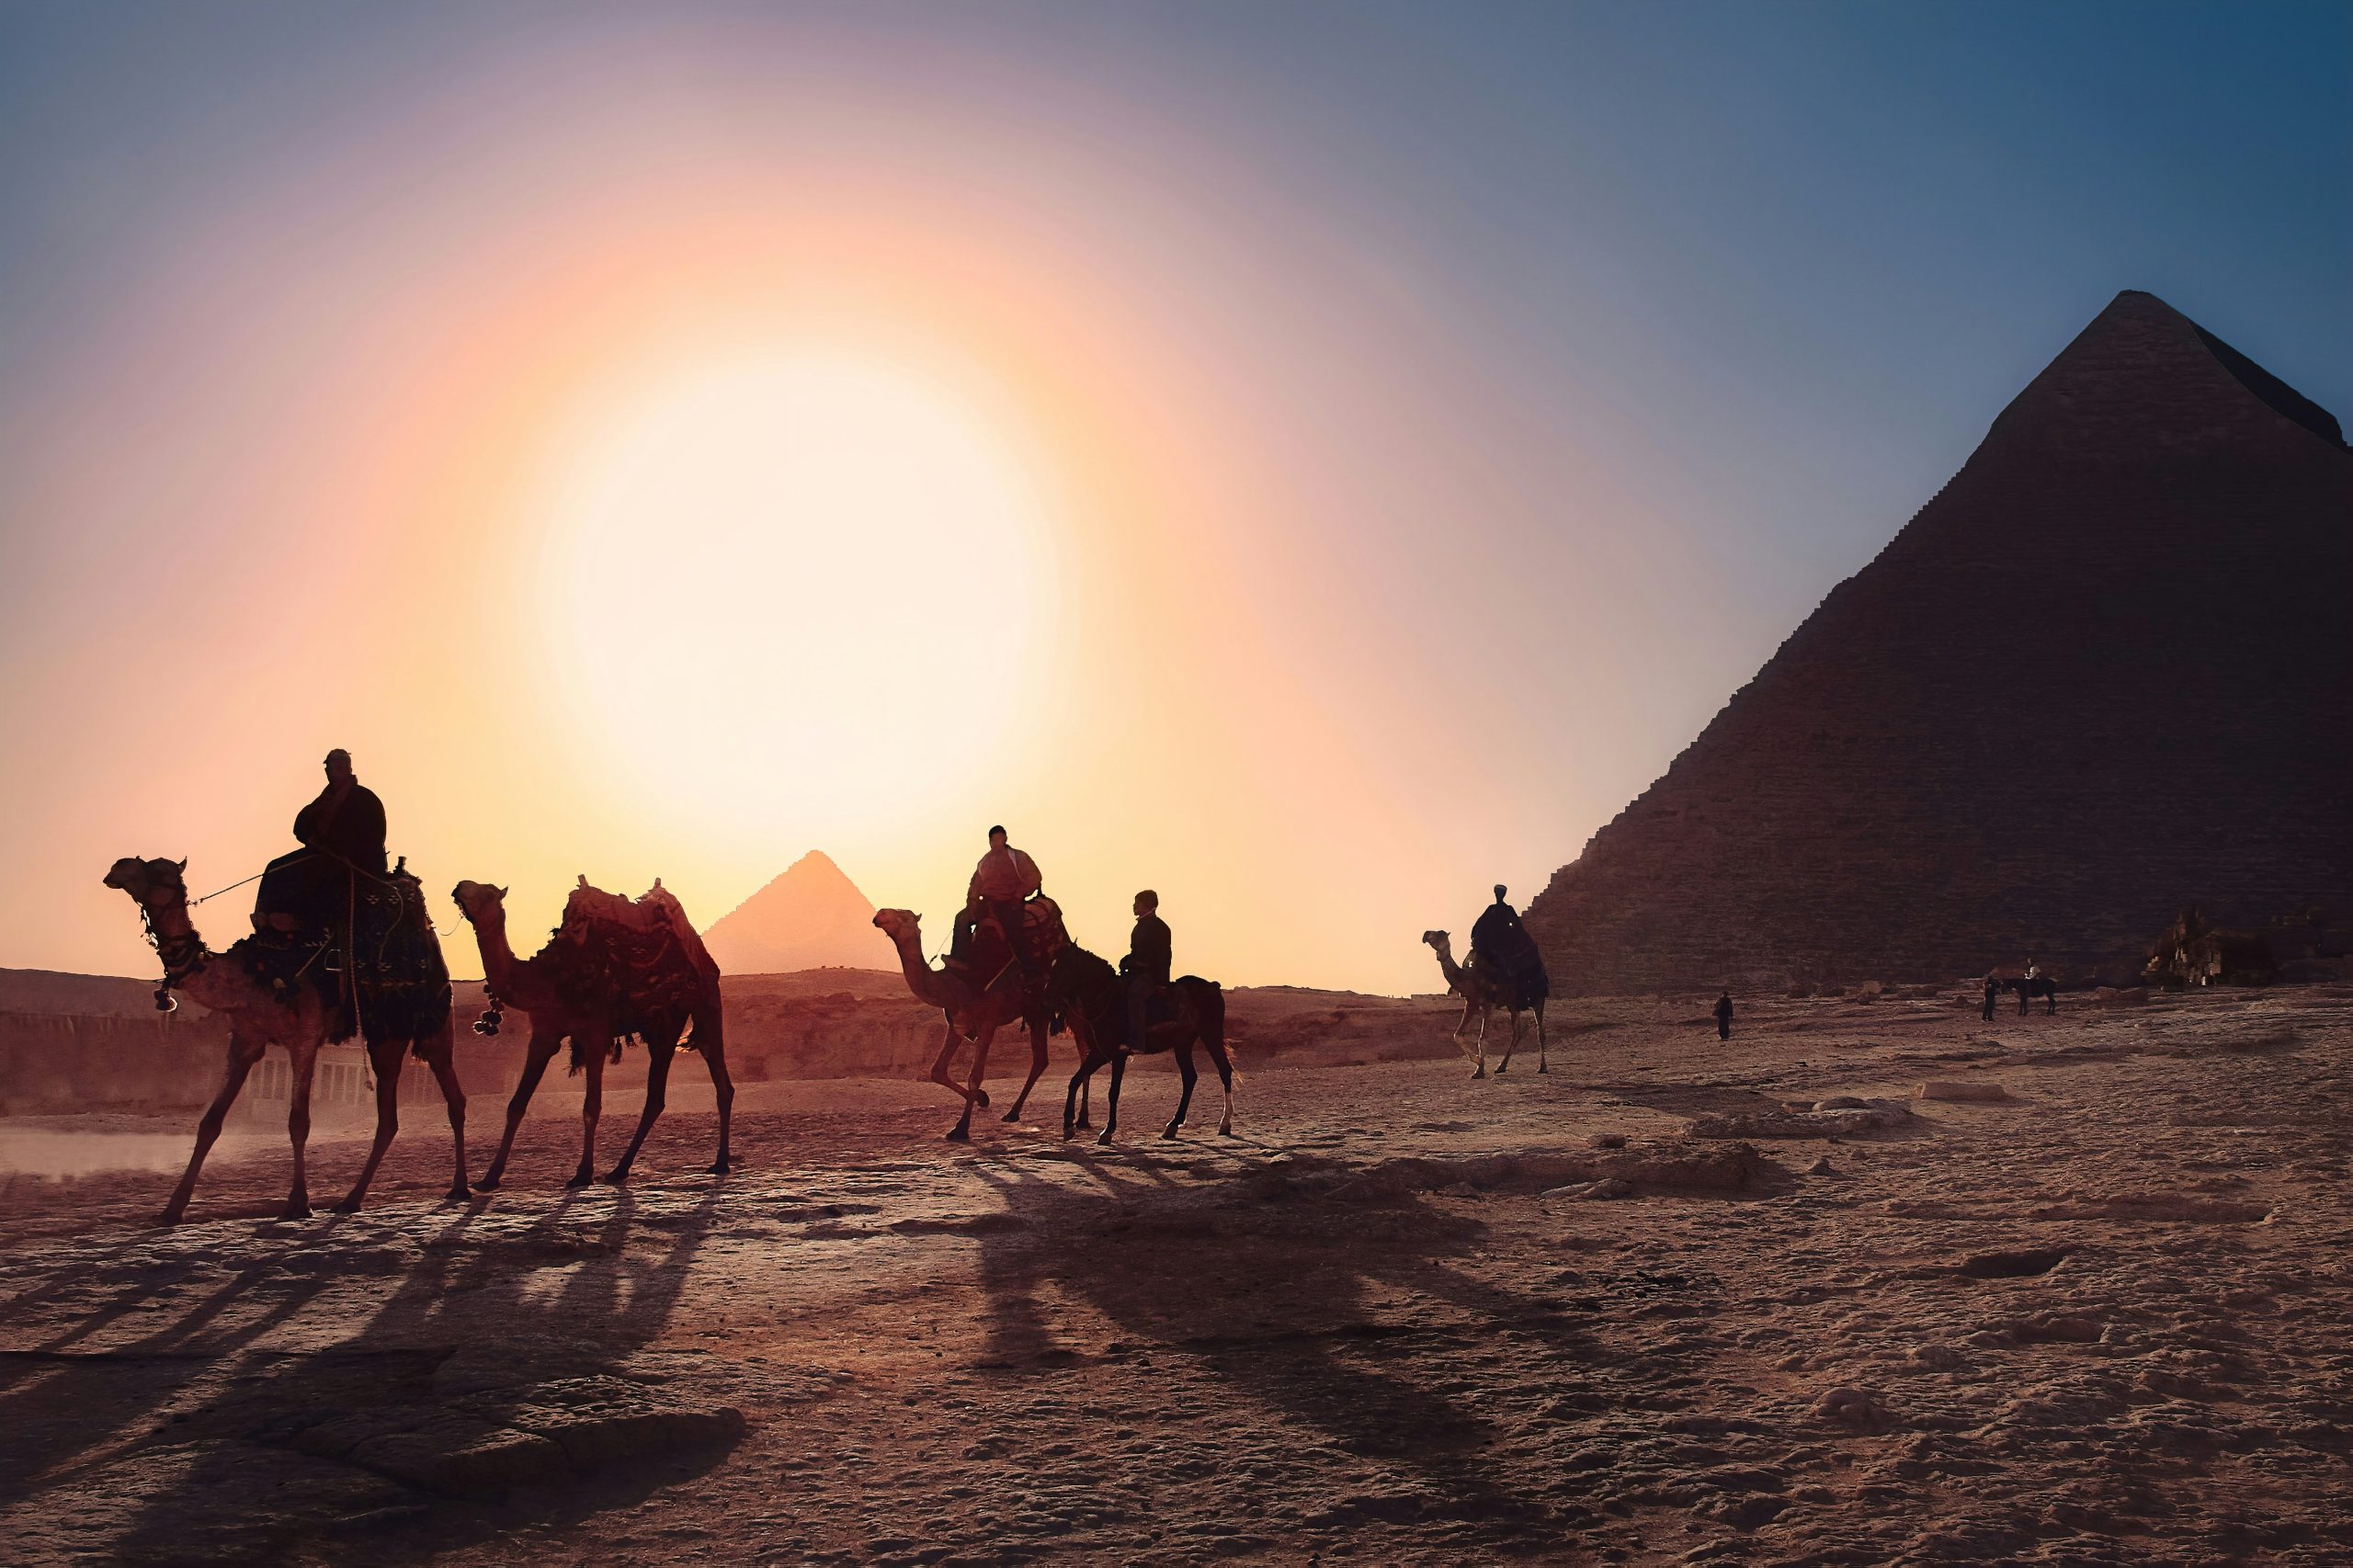 experience a breathtaking nile cruise in egypt and explore ancient wonders along the scenic riverbanks.